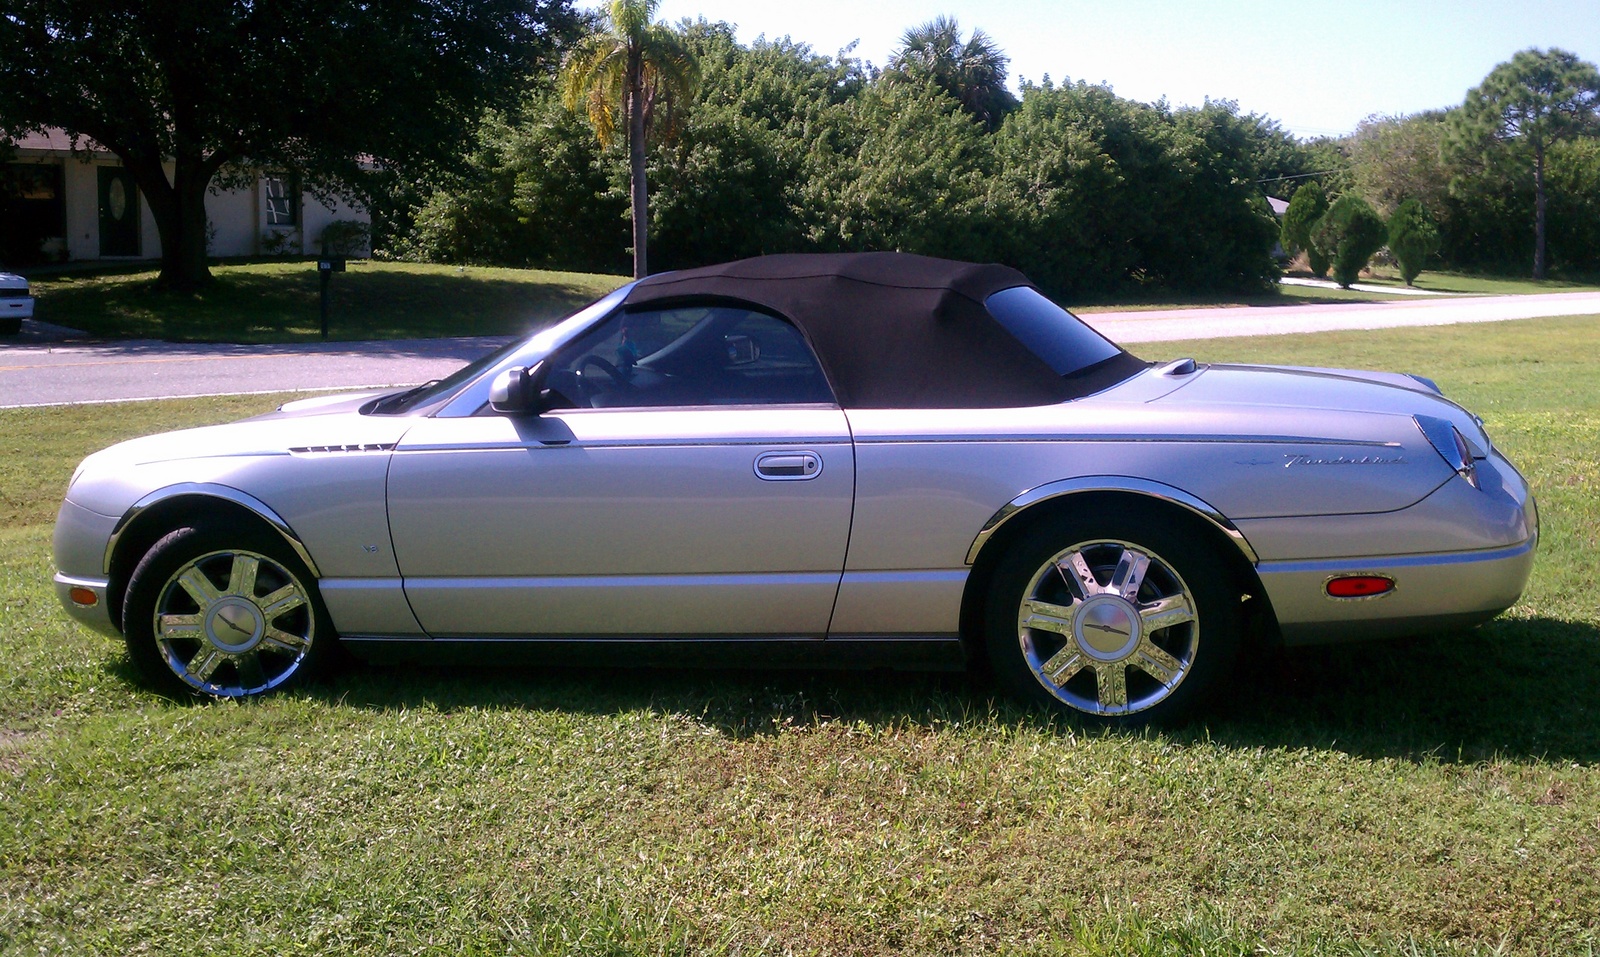 2004 Ford thunderbird review specs price quote #1